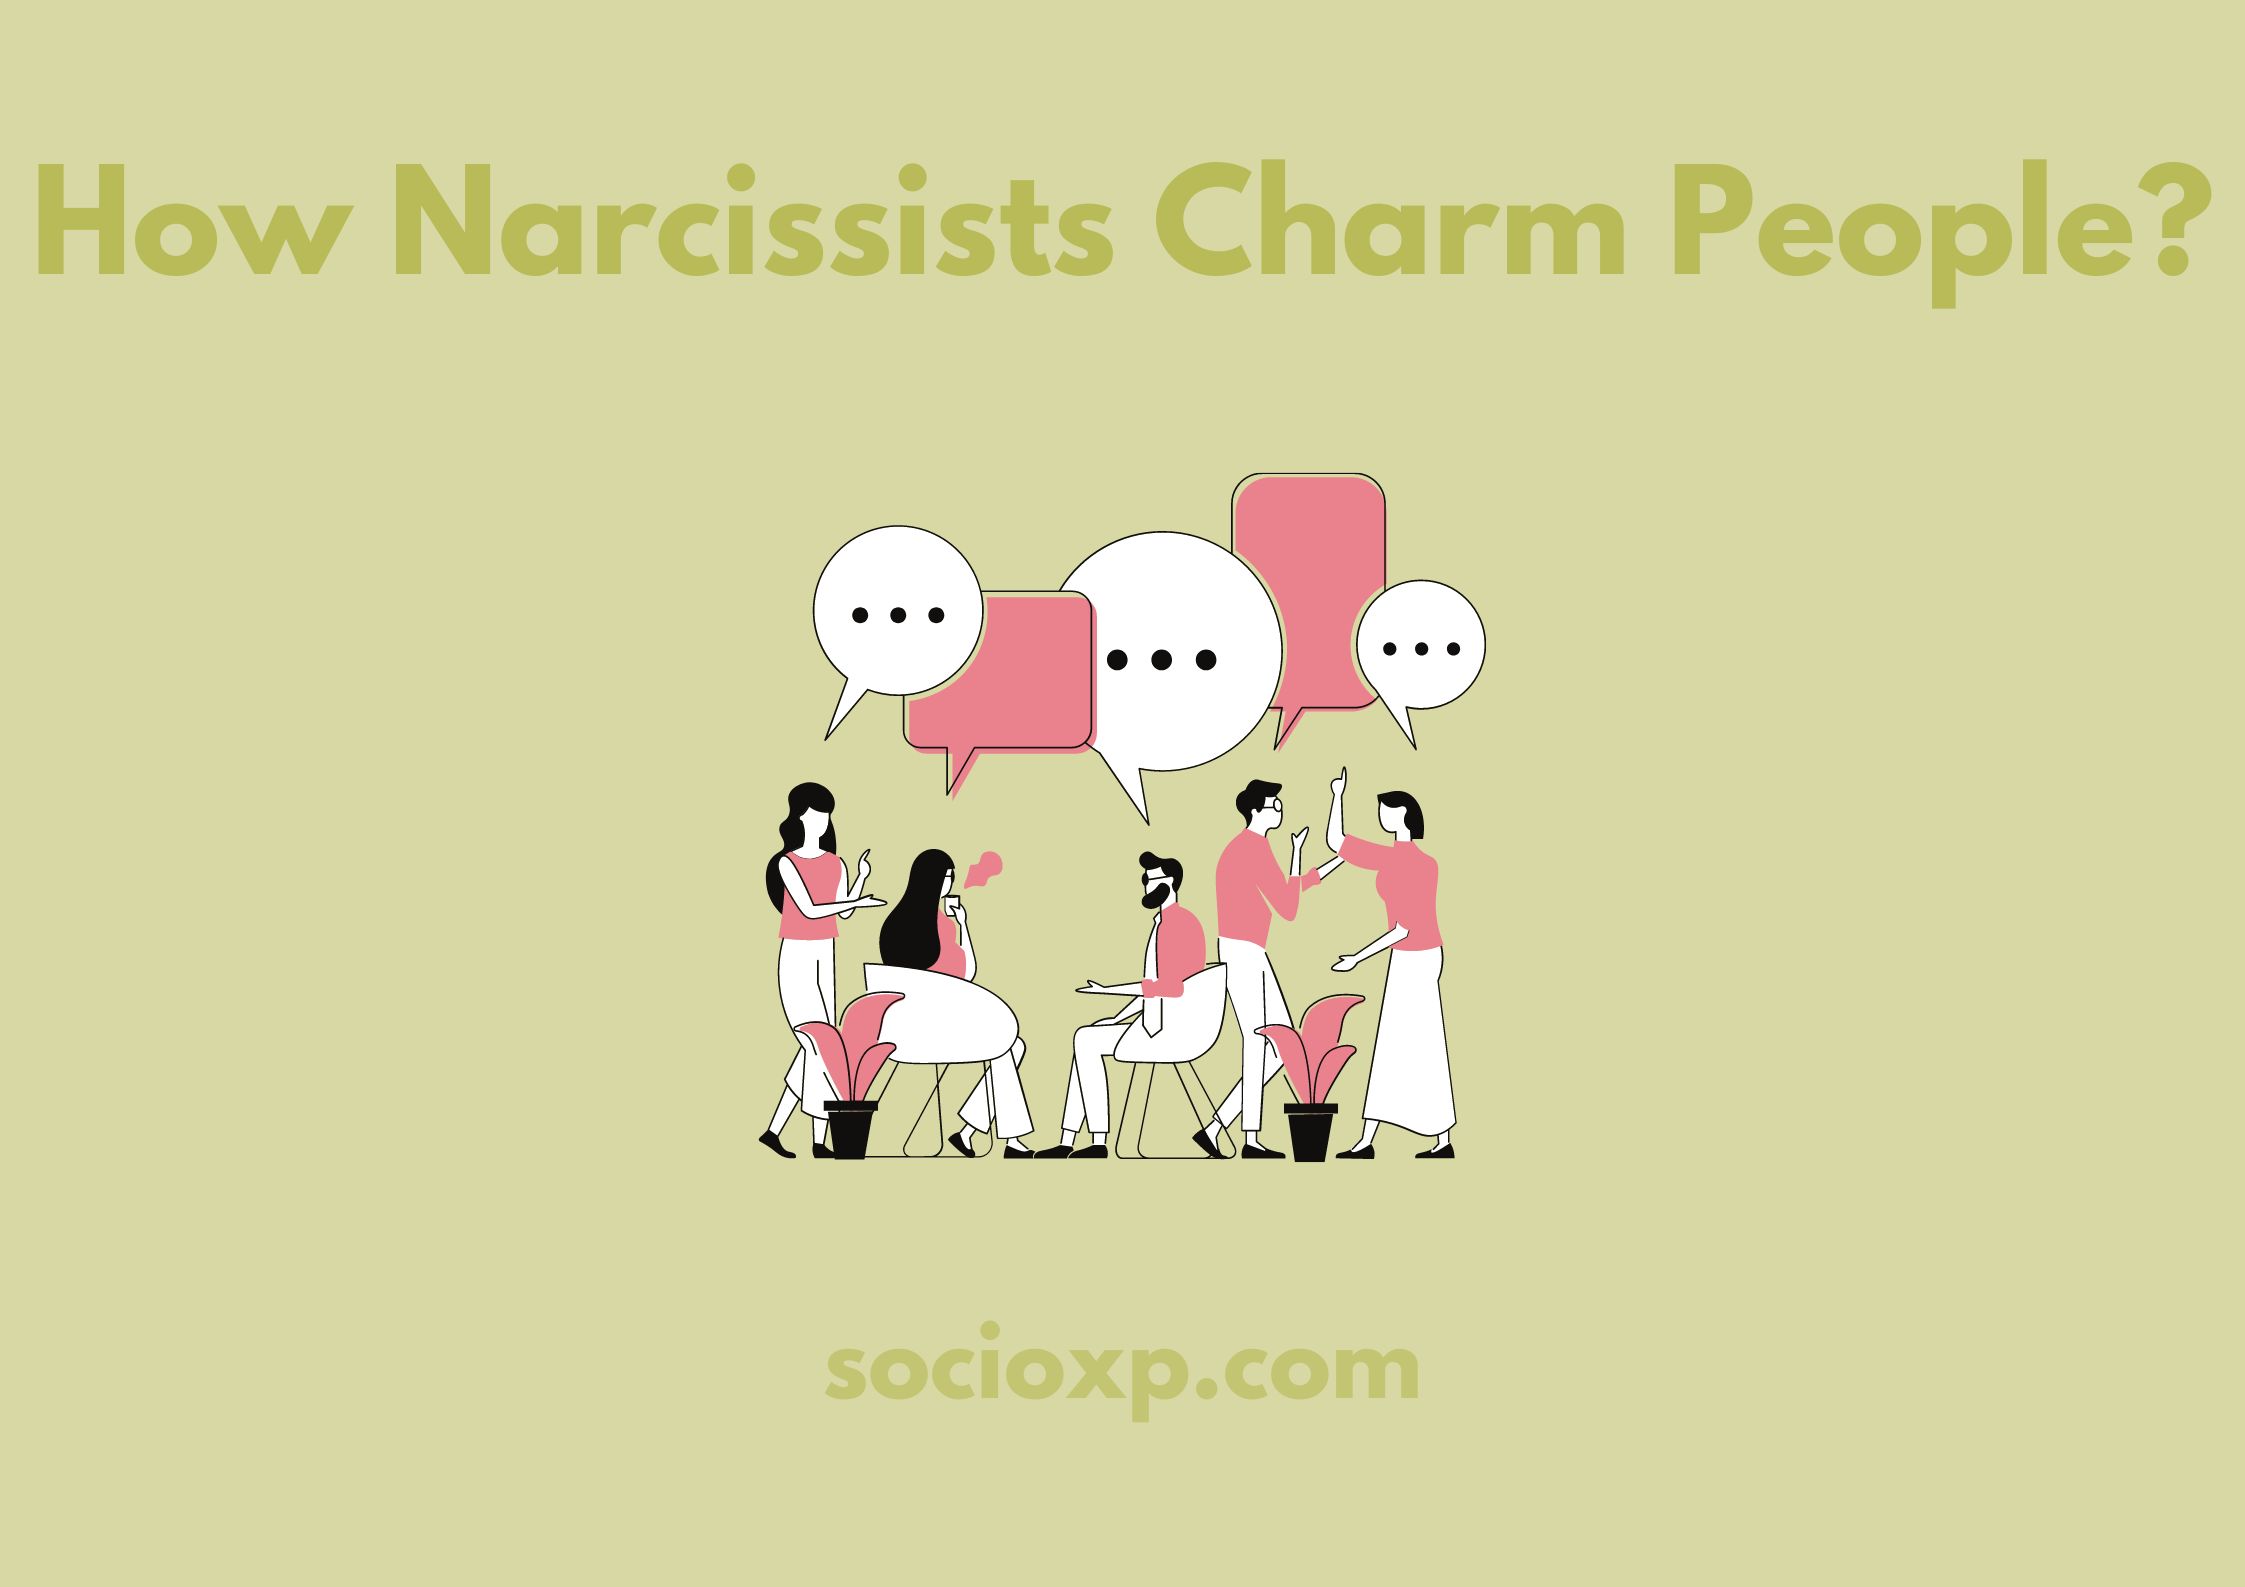 How Narcissists Charm People?